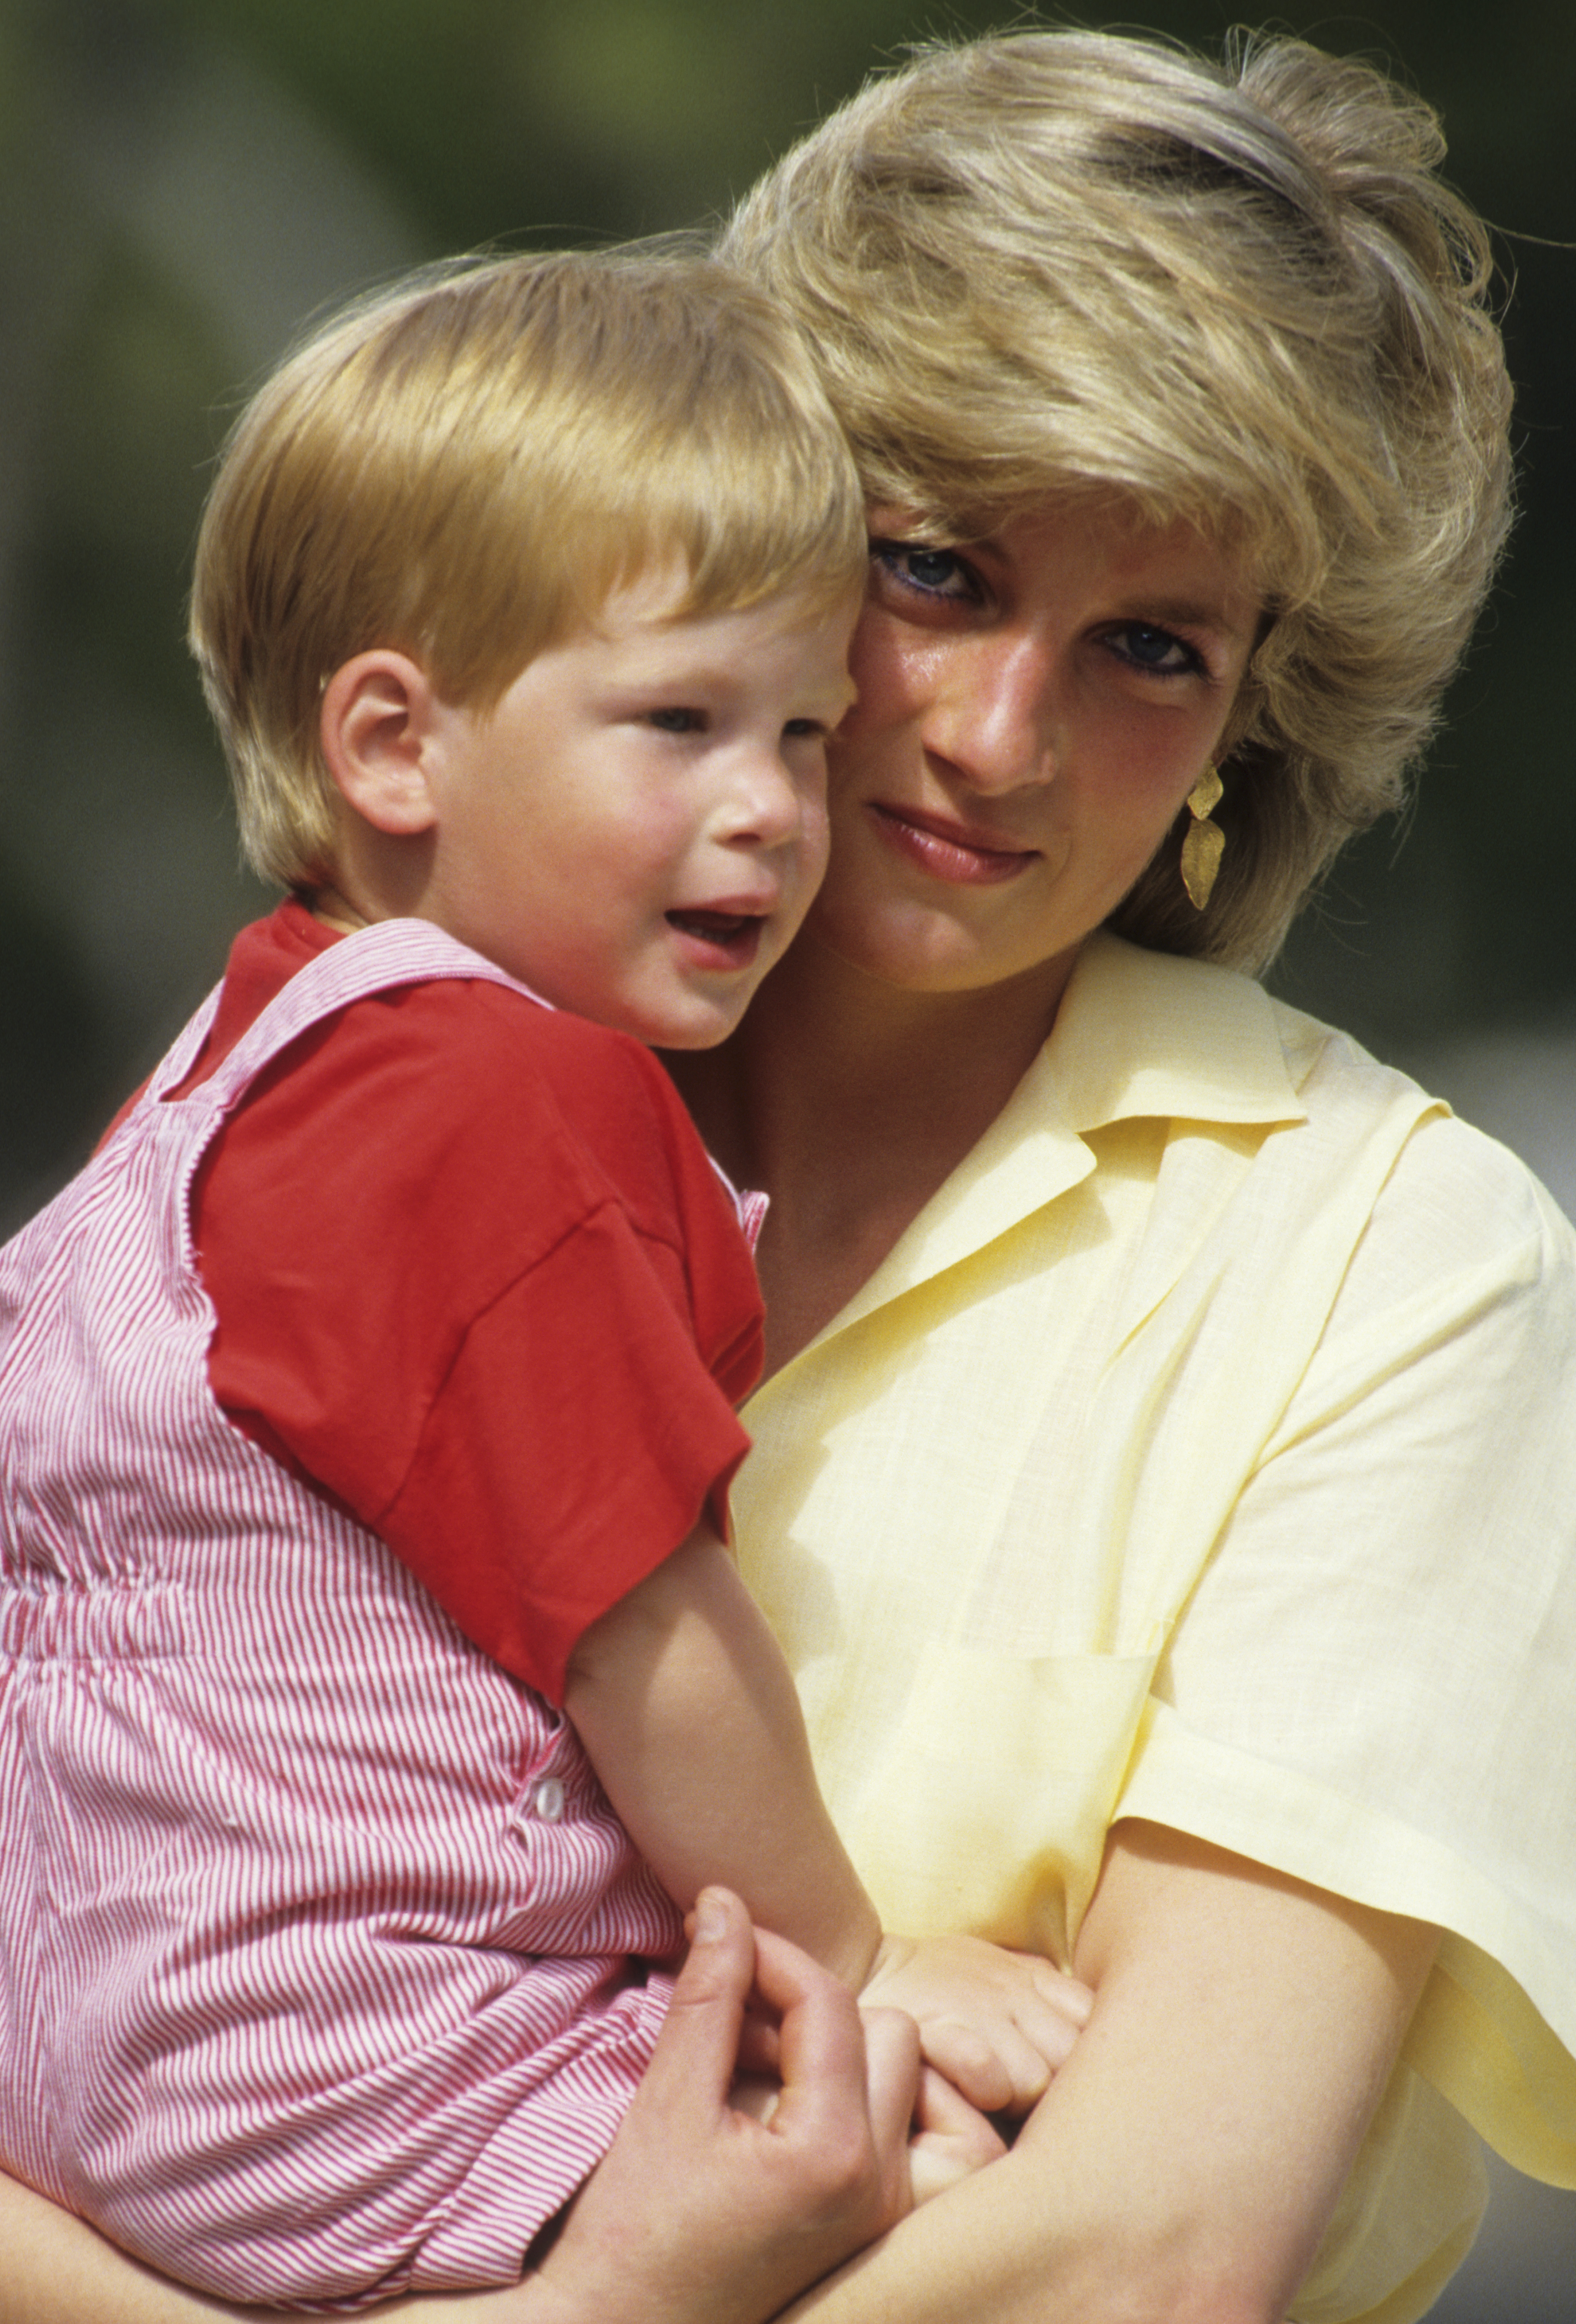 Princess Diana holds a young Prince Harry, both smiling in casual attire